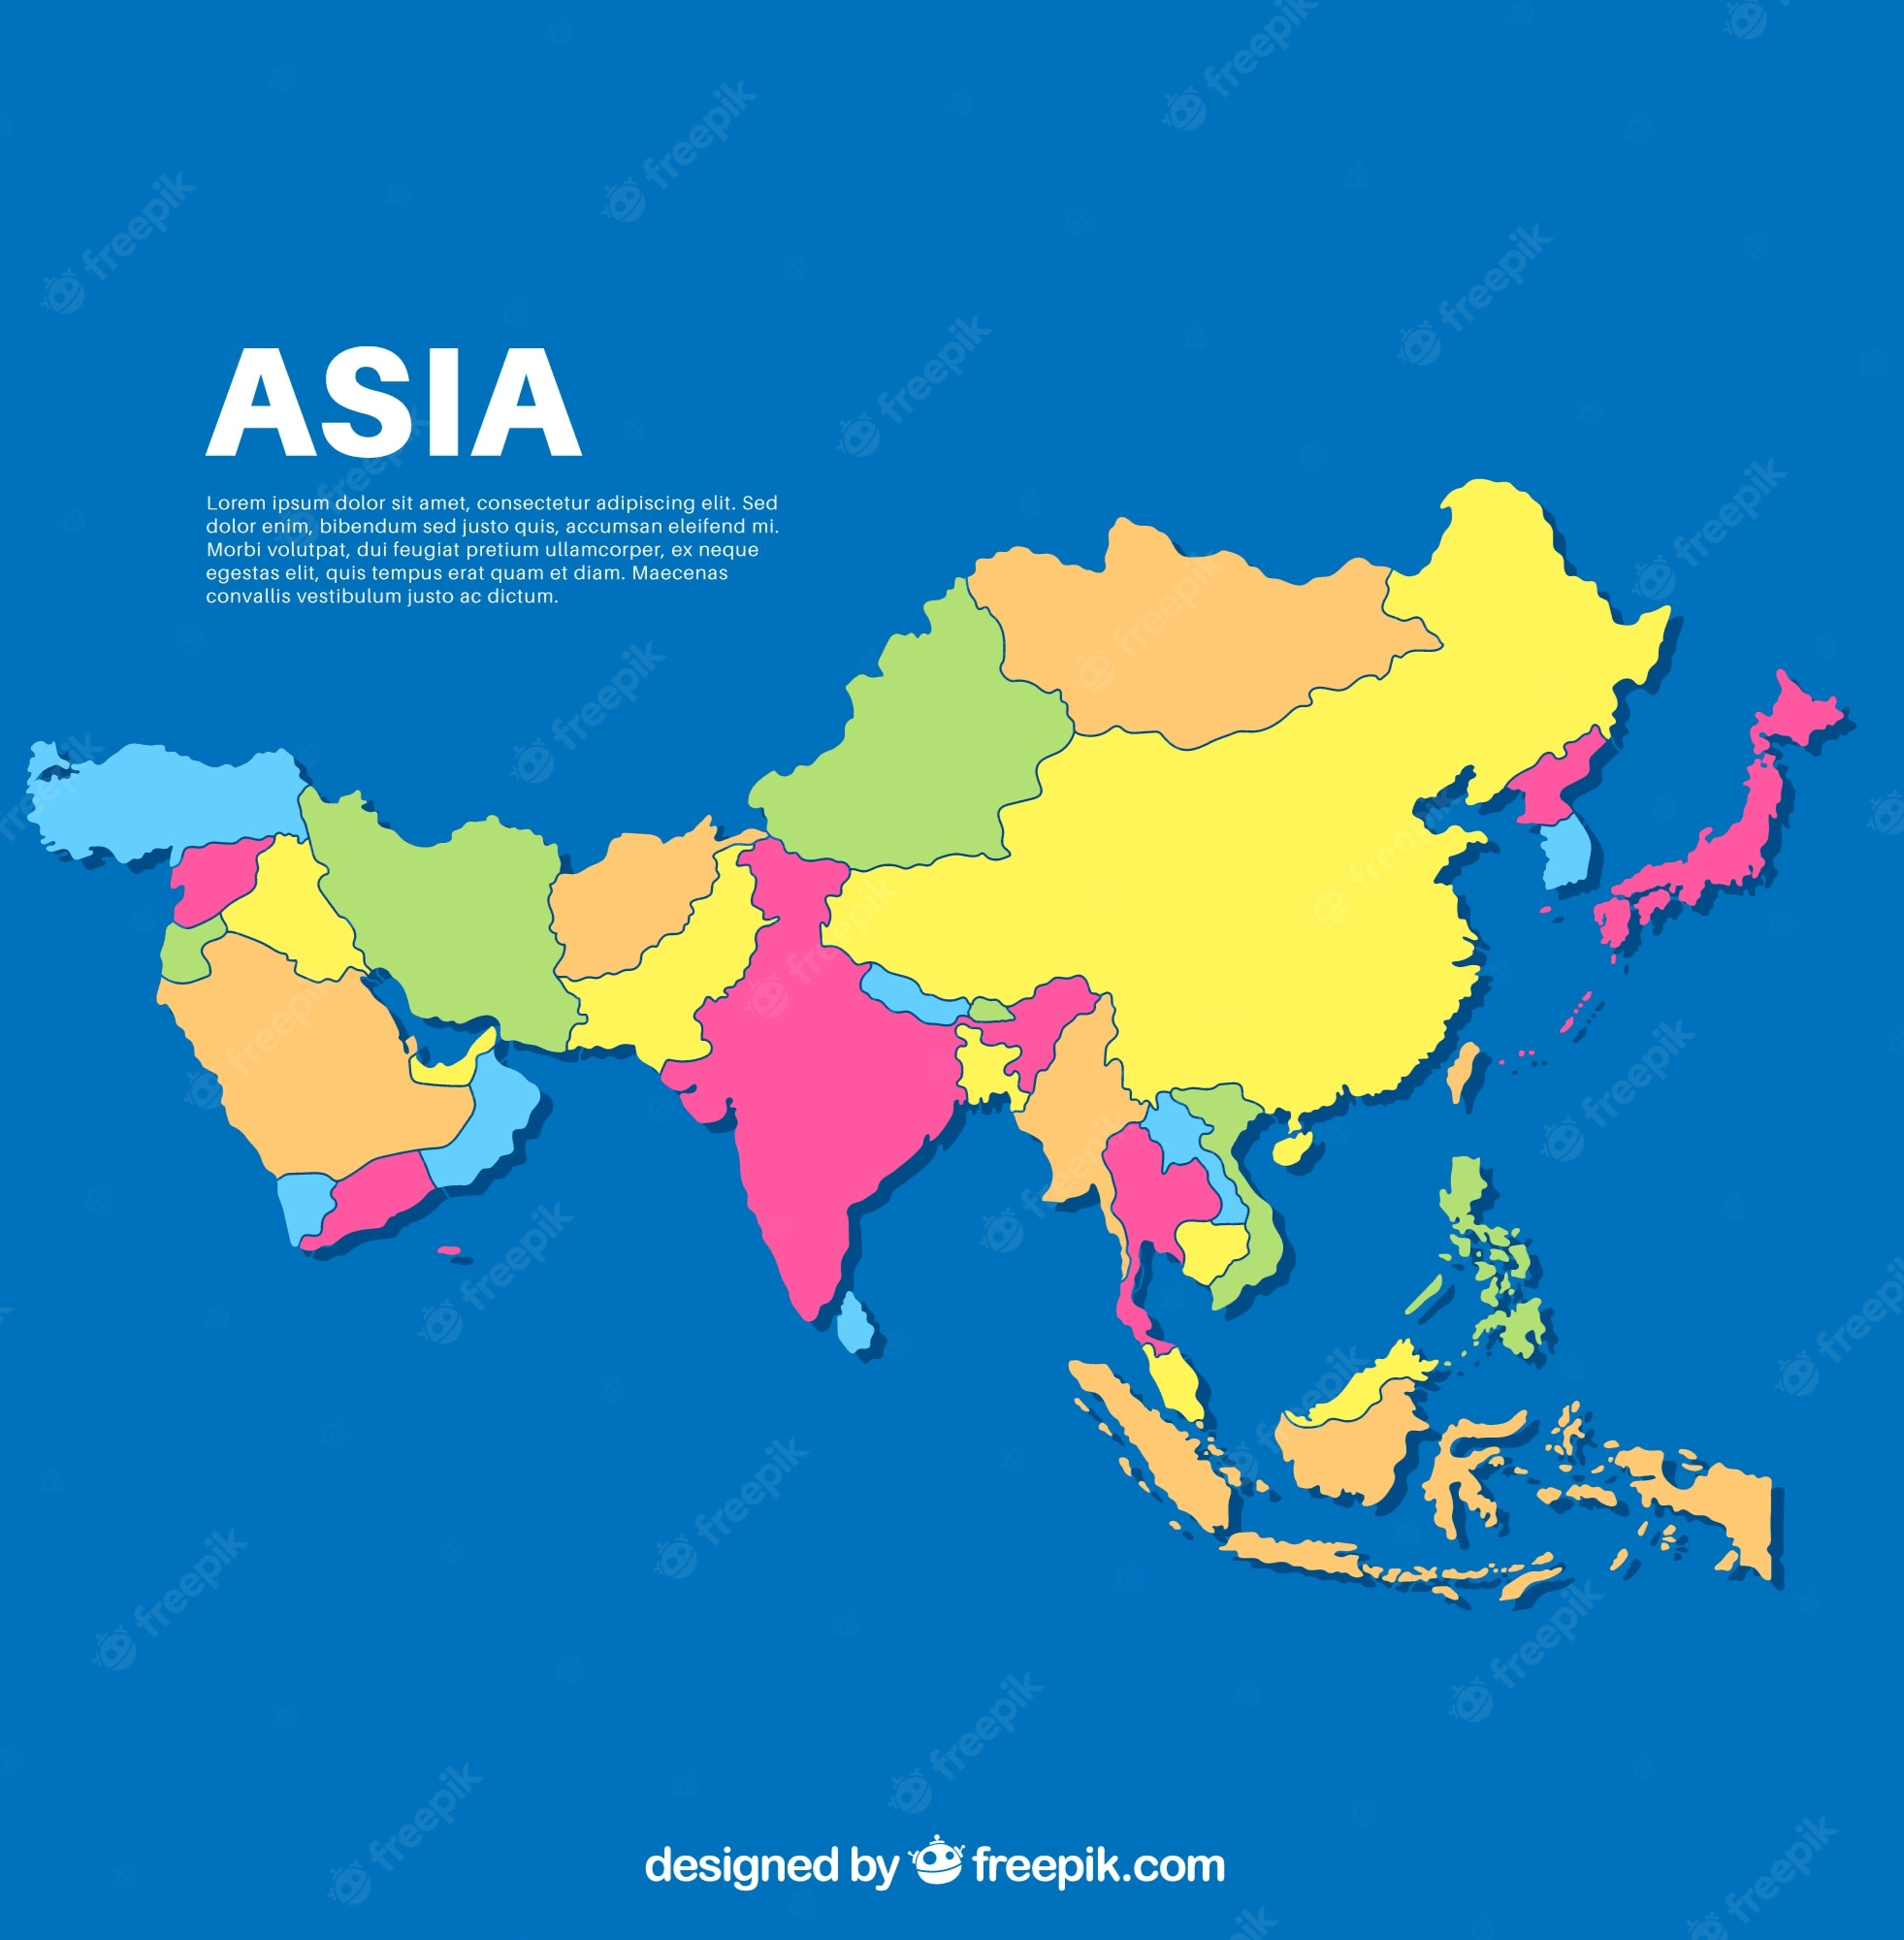 countries in asia - Year 7 - Quizizz